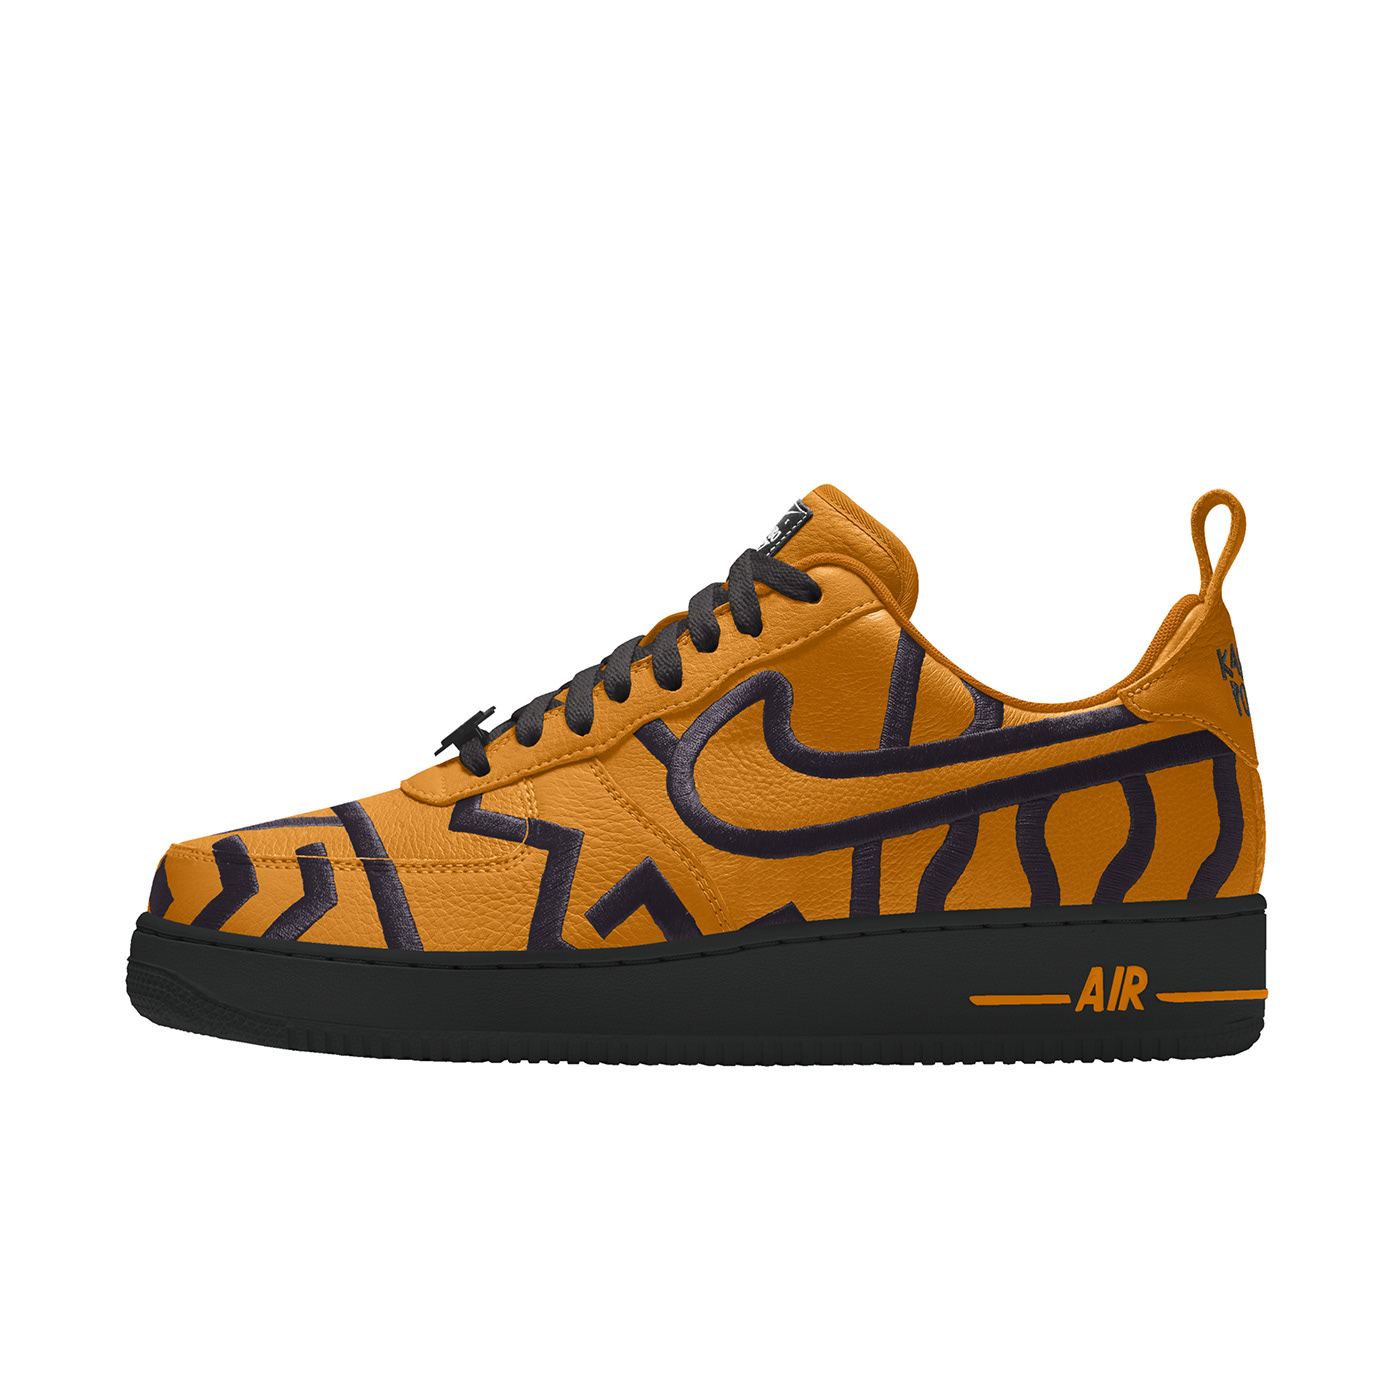 Nike air force 1 Collaboration south africa africa Sneaker Design nike by you Nike ID af1 african aesthetic